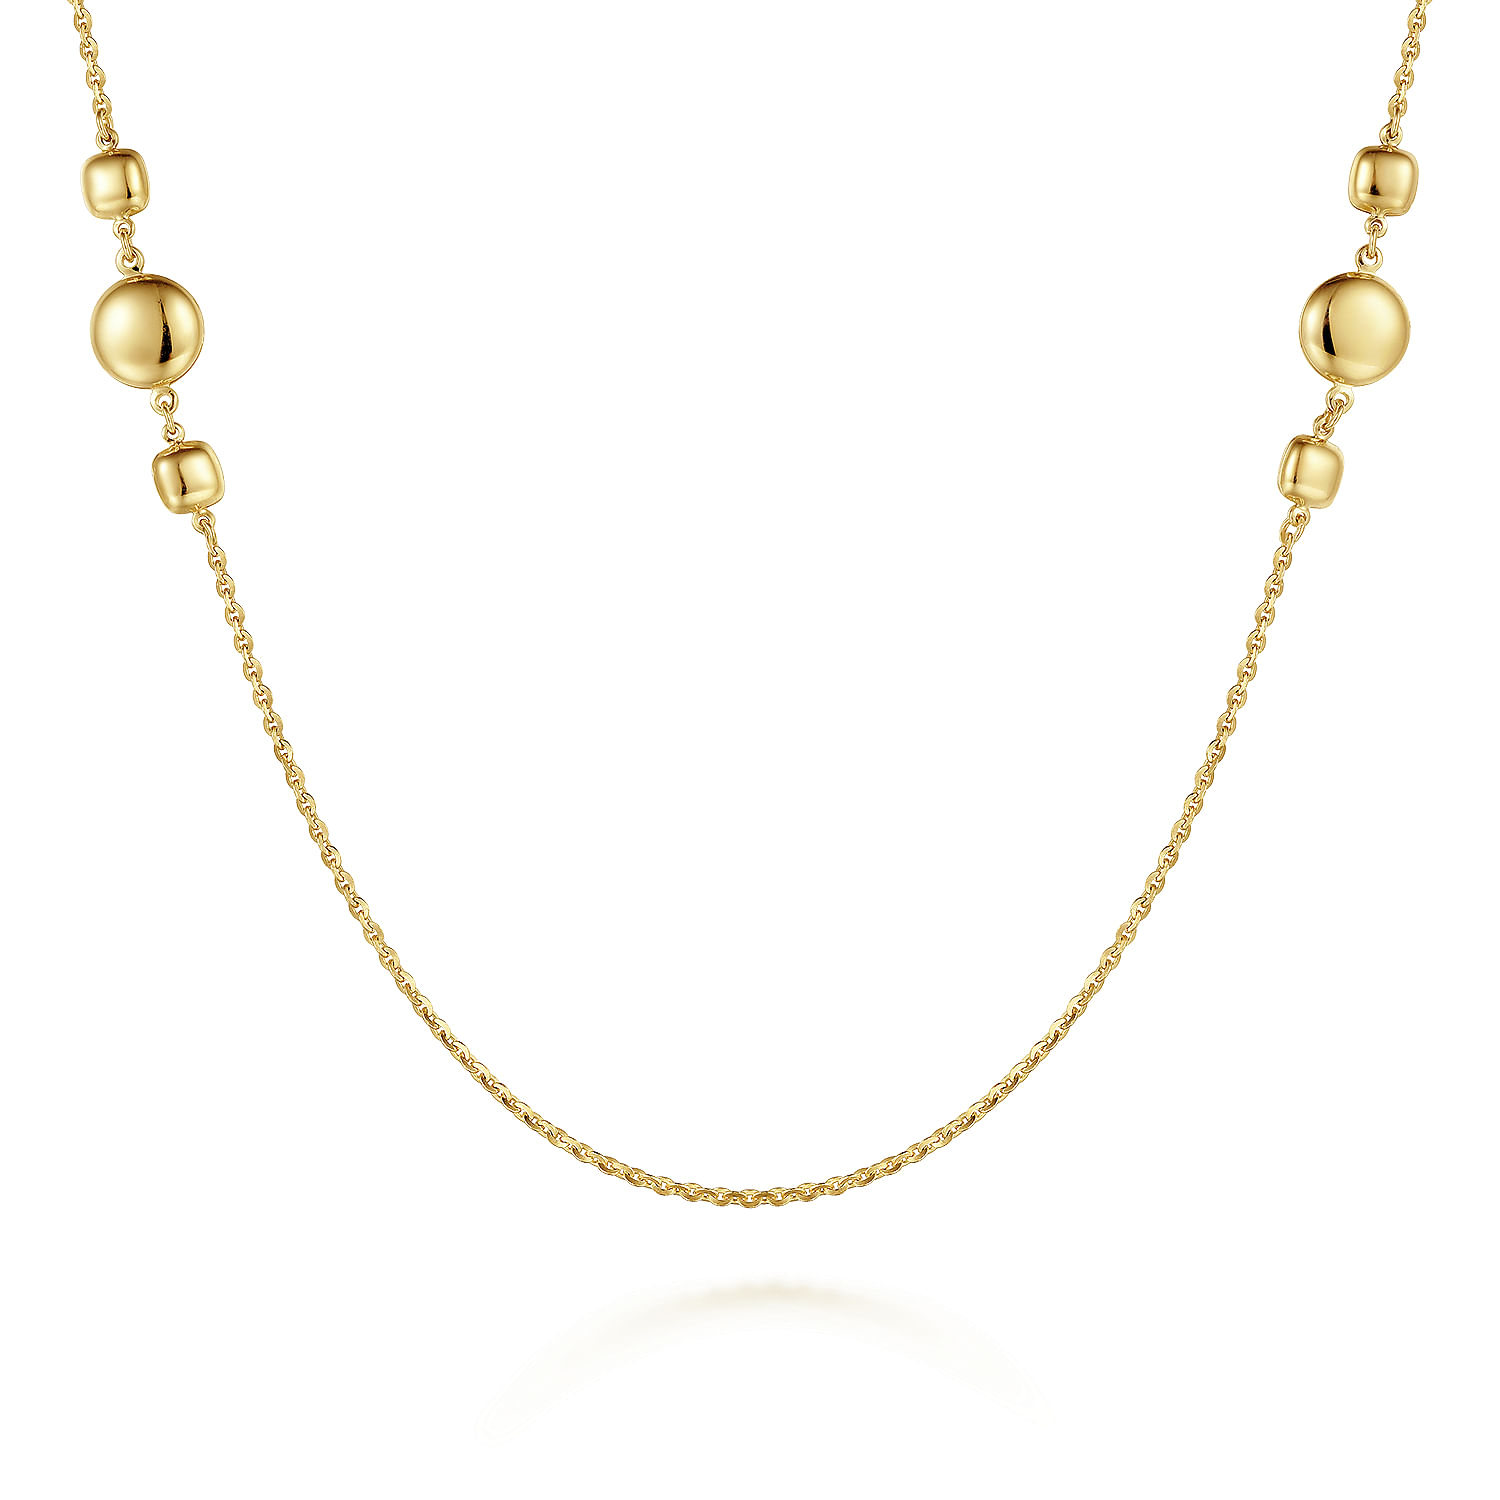 32 inch 14K Yellow Gold Station Necklace